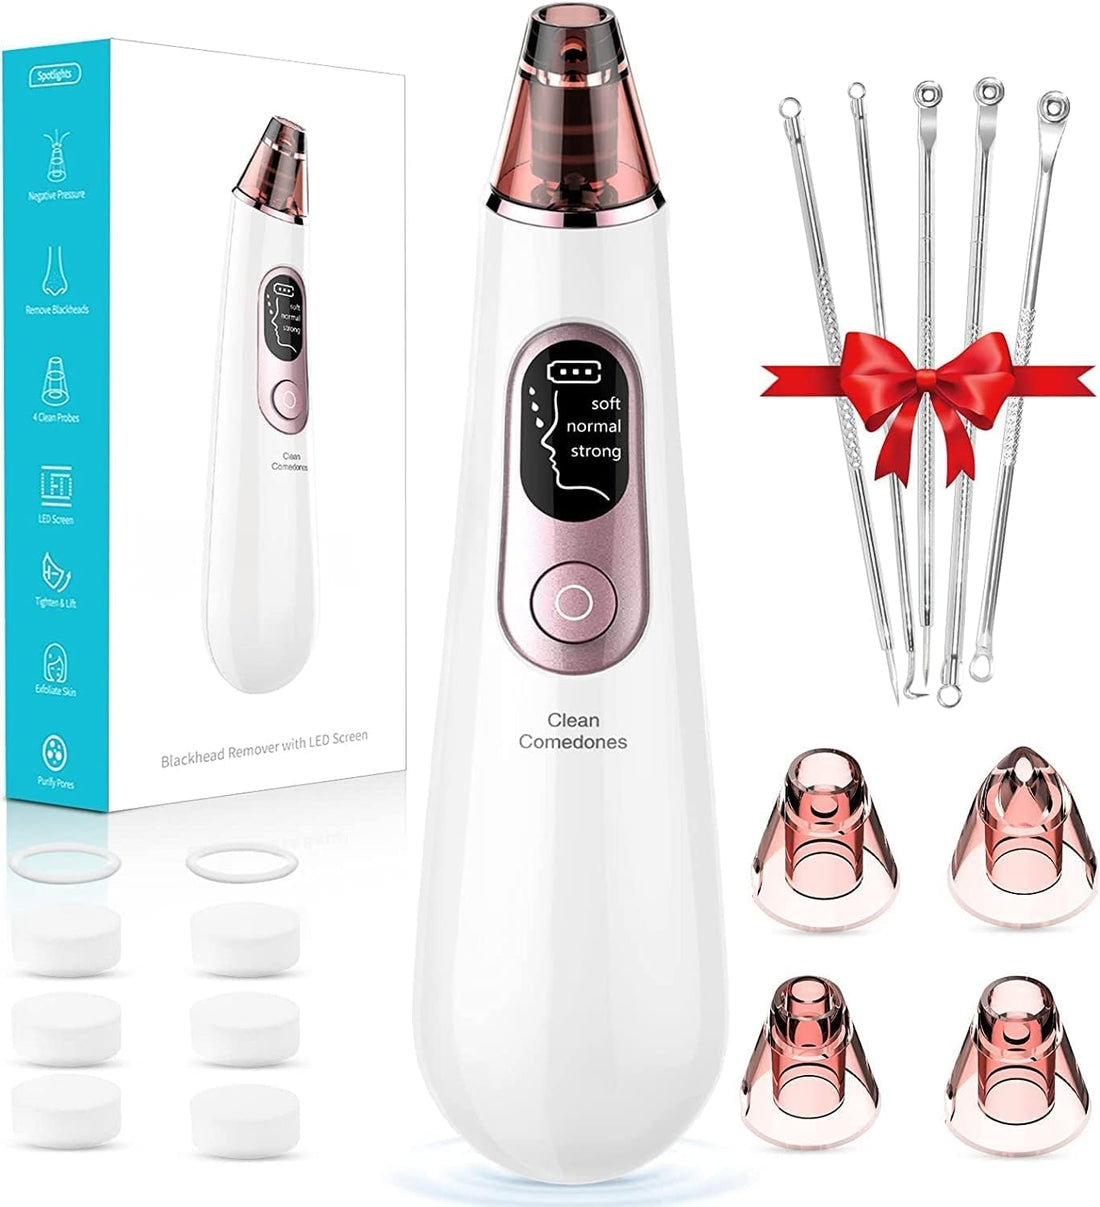 Blackhead Remover Pore Vacuum: Electric Black Head Remover for Face Acne Comedone Whitehead Extractor Kit with 3 Suction Power 4 Probes Pore Cleaner Blackhead Remover Tool for Men &amp; Women - HealthFulBeautyLife